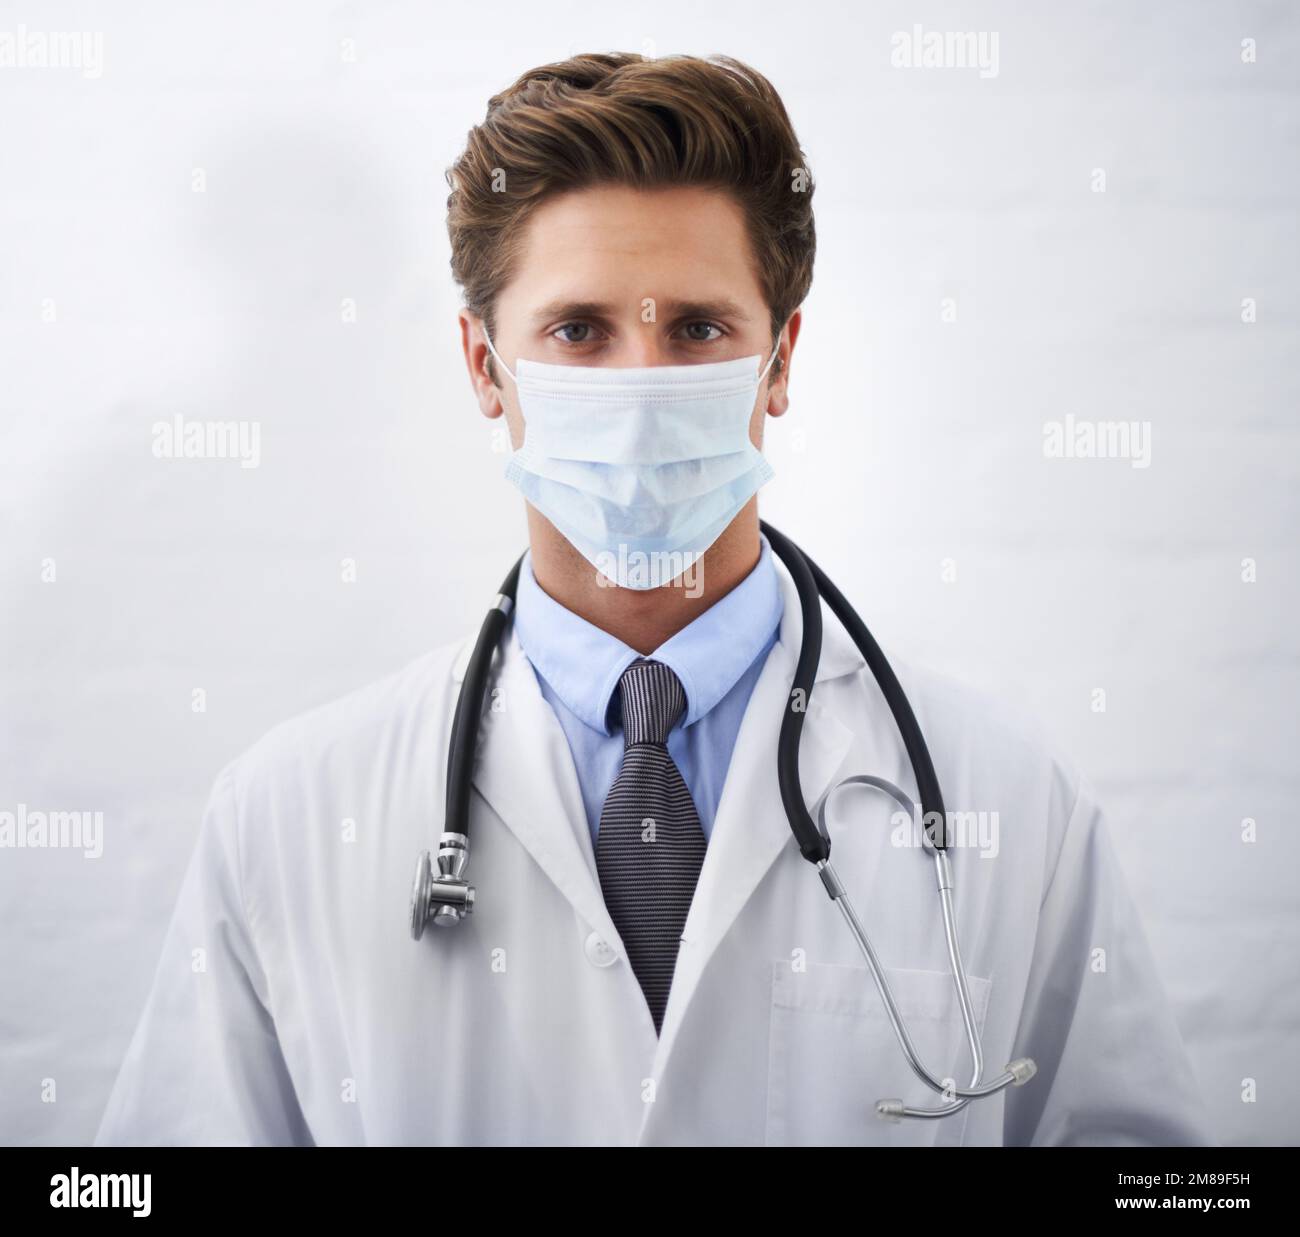 Taking medical matters seriously. Portrait of a serious-looking young doctor wearing a surgical mask. Stock Photo